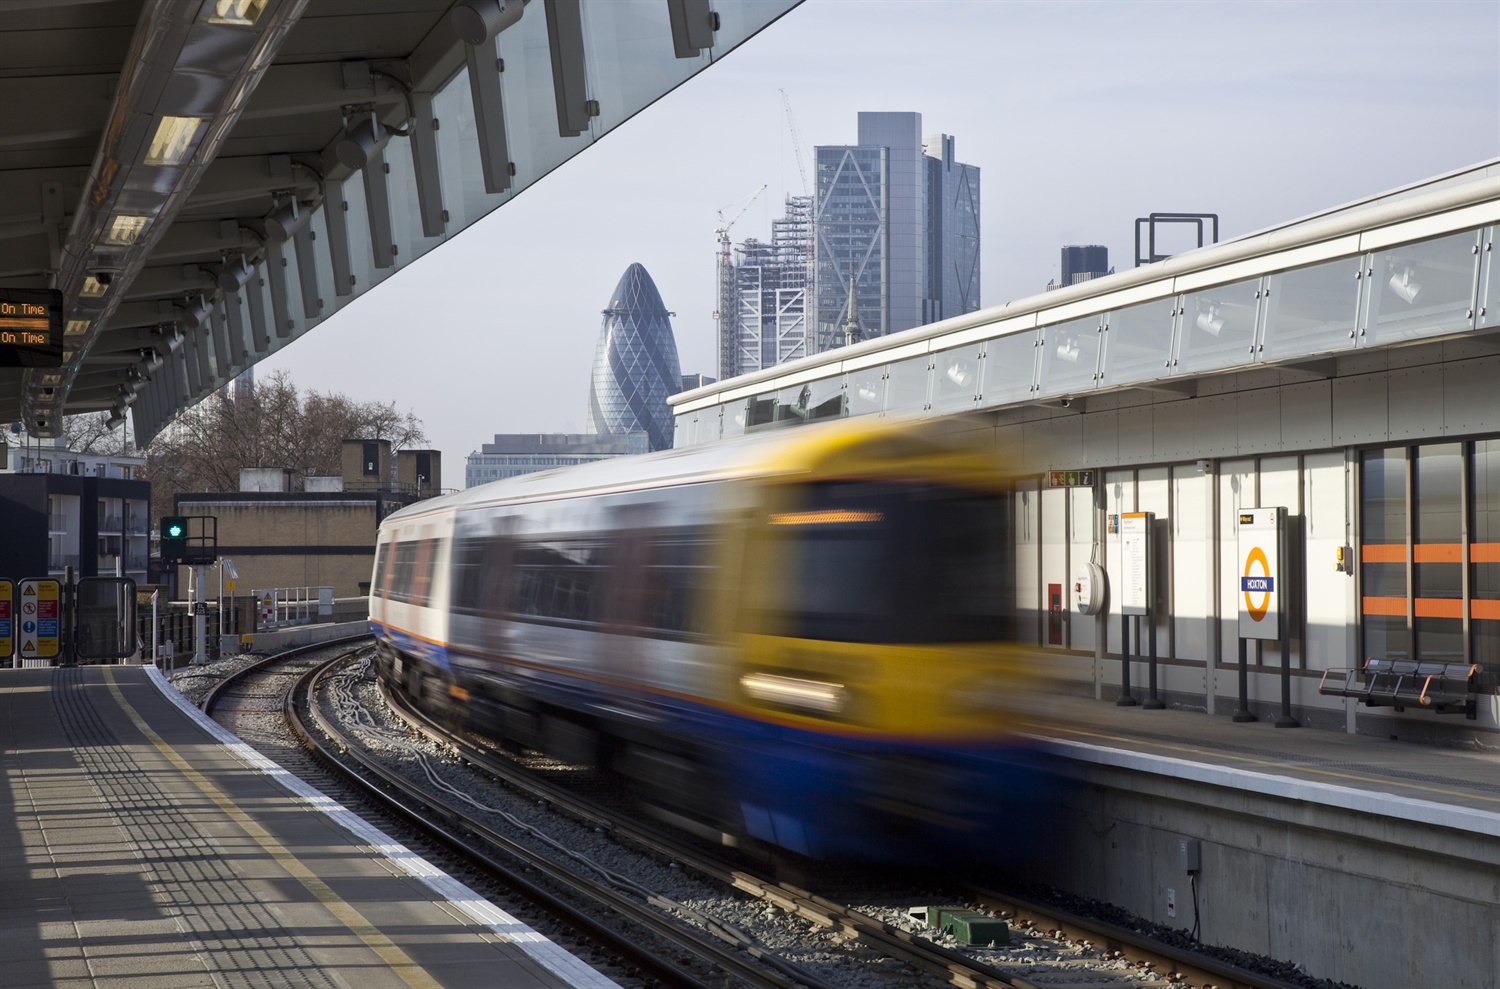 Arriva to land £1.5bn contract to deliver London Overground services